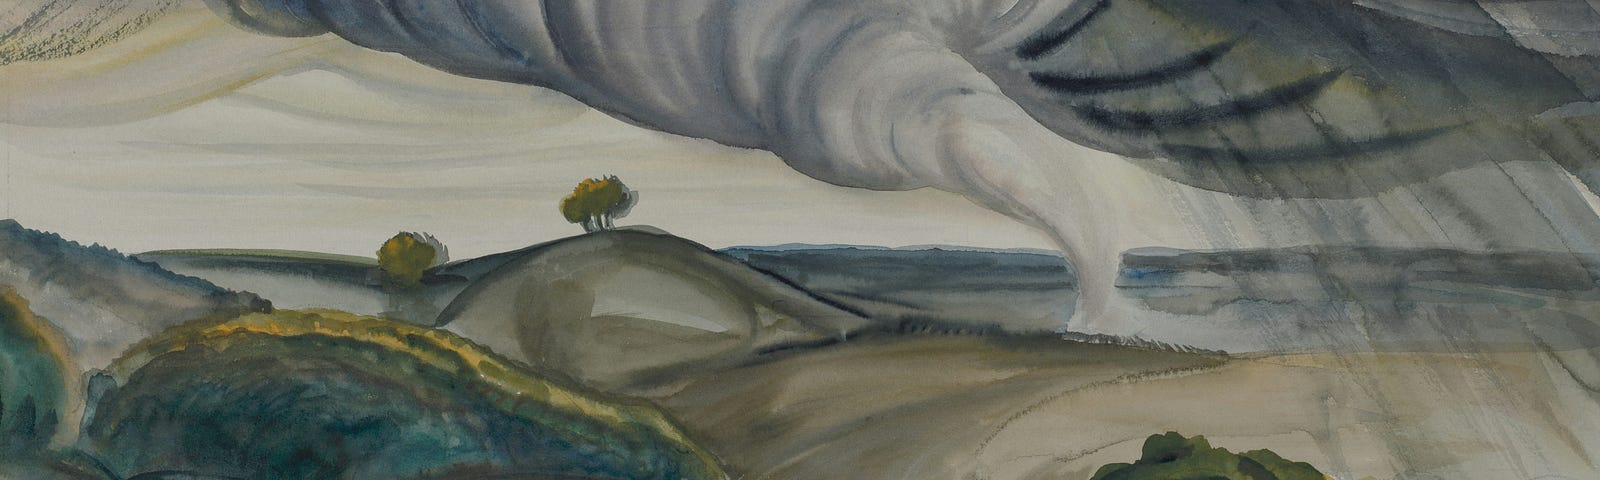 A darkly whimsical painting of a tornado in a whirling landscape